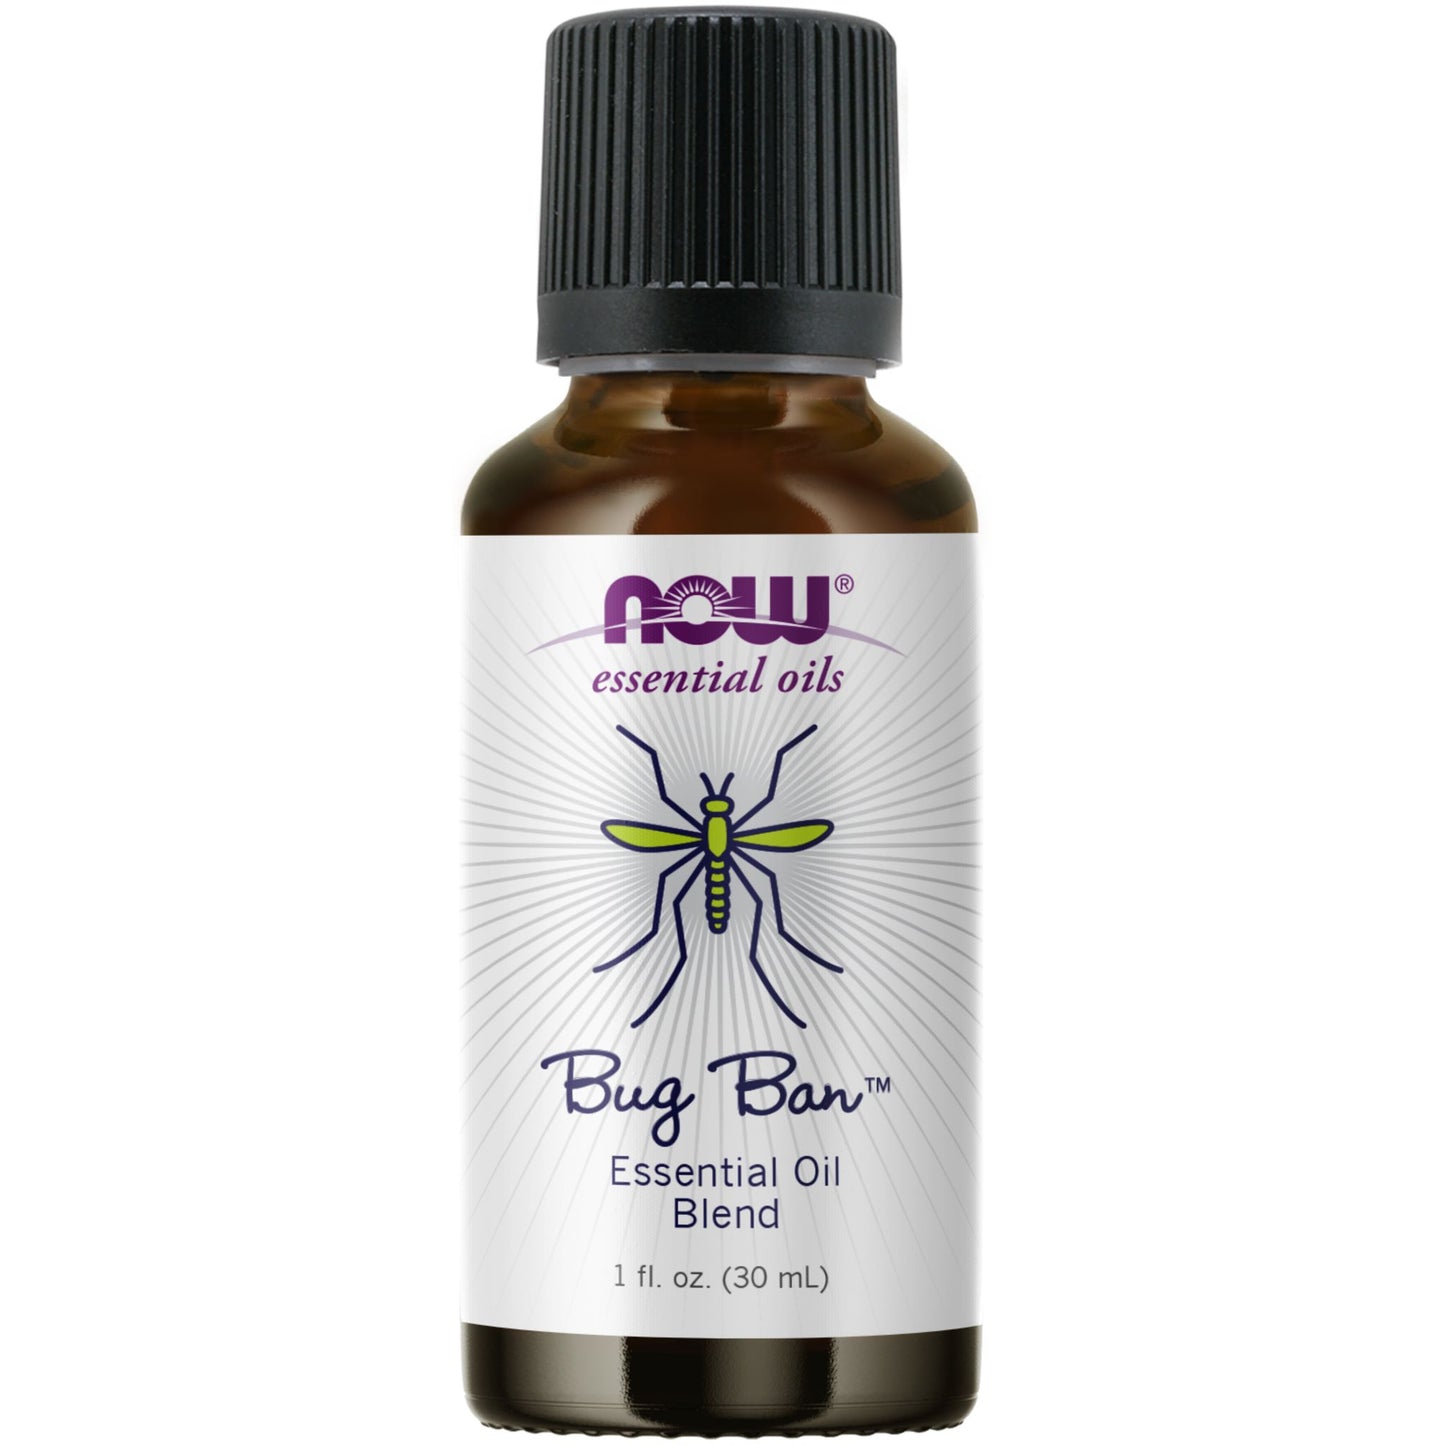 NOW Foods Bug Ban Essential Oil Blend